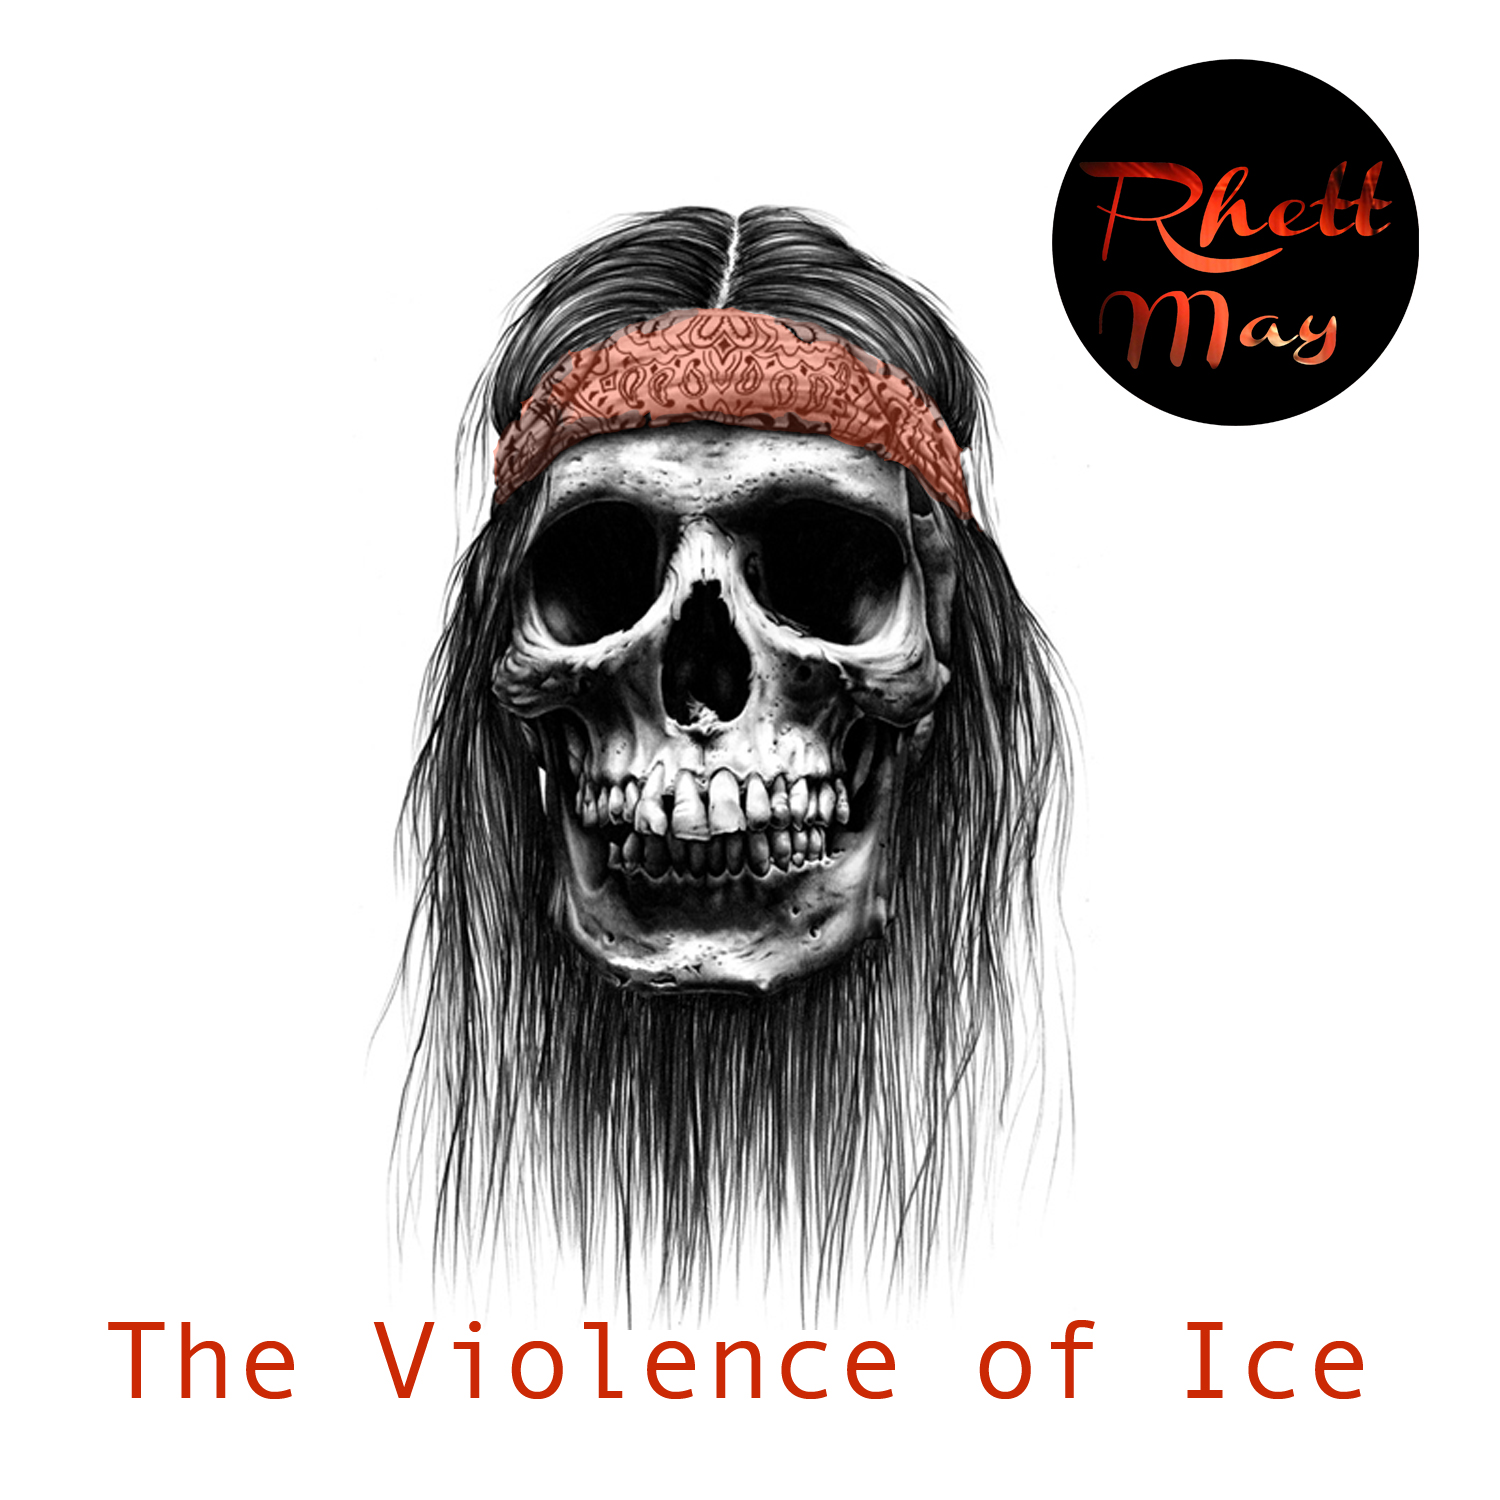 'The Violence of Ice' ....Award winning song....track 1 off the album 'Fast Cars and Sitars'